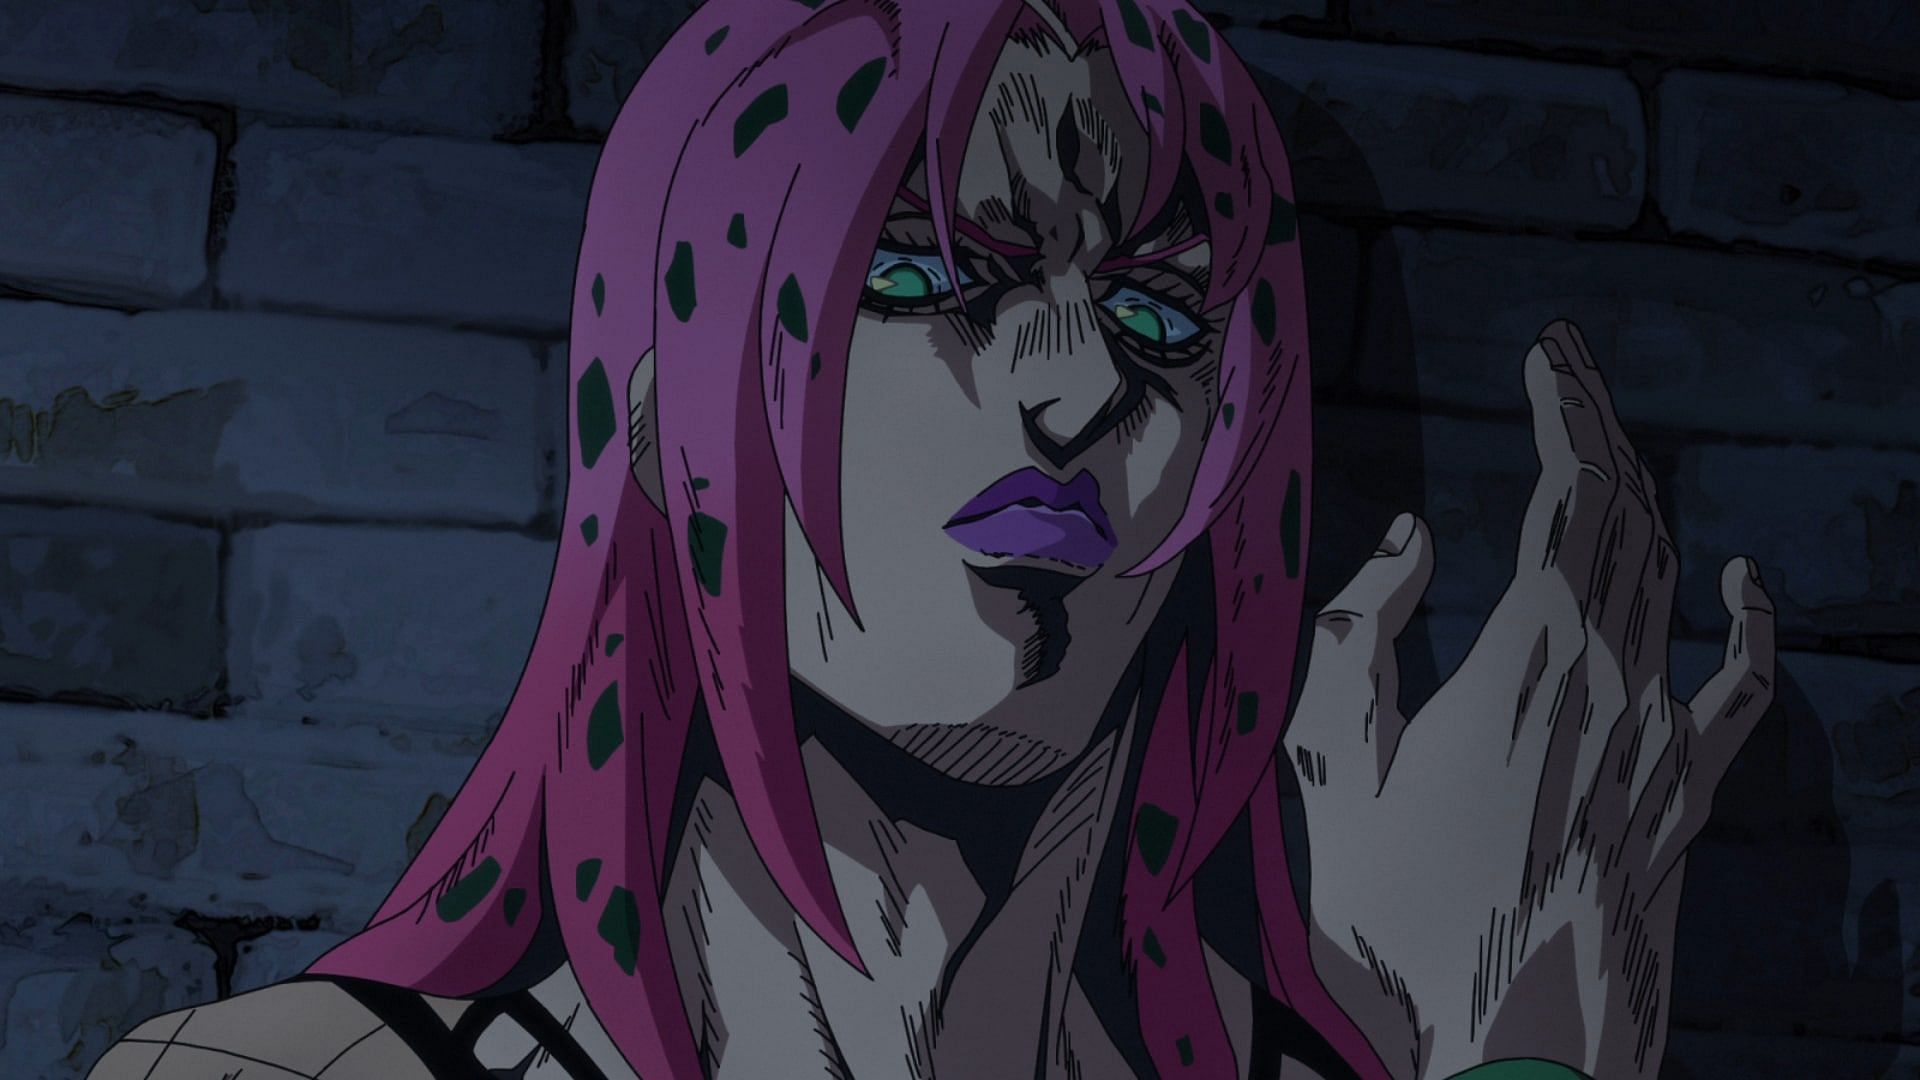 Diavolo is another of those anime characters who can manipulate time (Image via David Production).